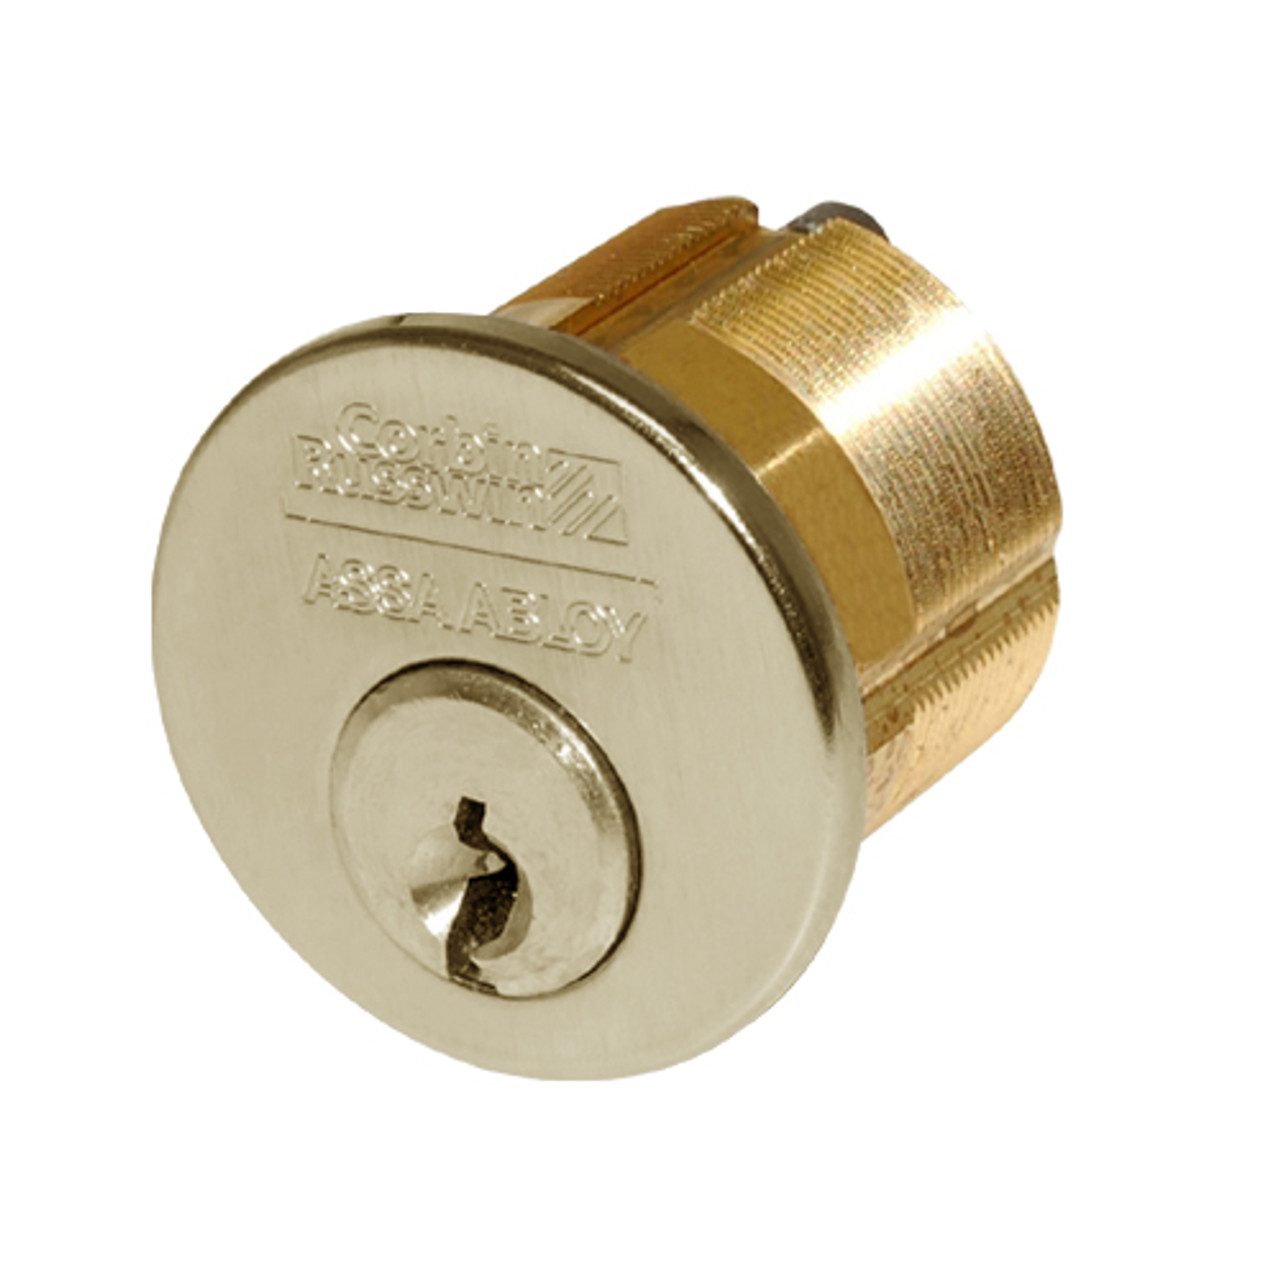 CR1000-114-A06-6-L4-606 Corbin Conventional Mortise Cylinder for Mortise Lock and DL3000 Deadlocks with Schlage L9000 Cam in Satin Brass Finish